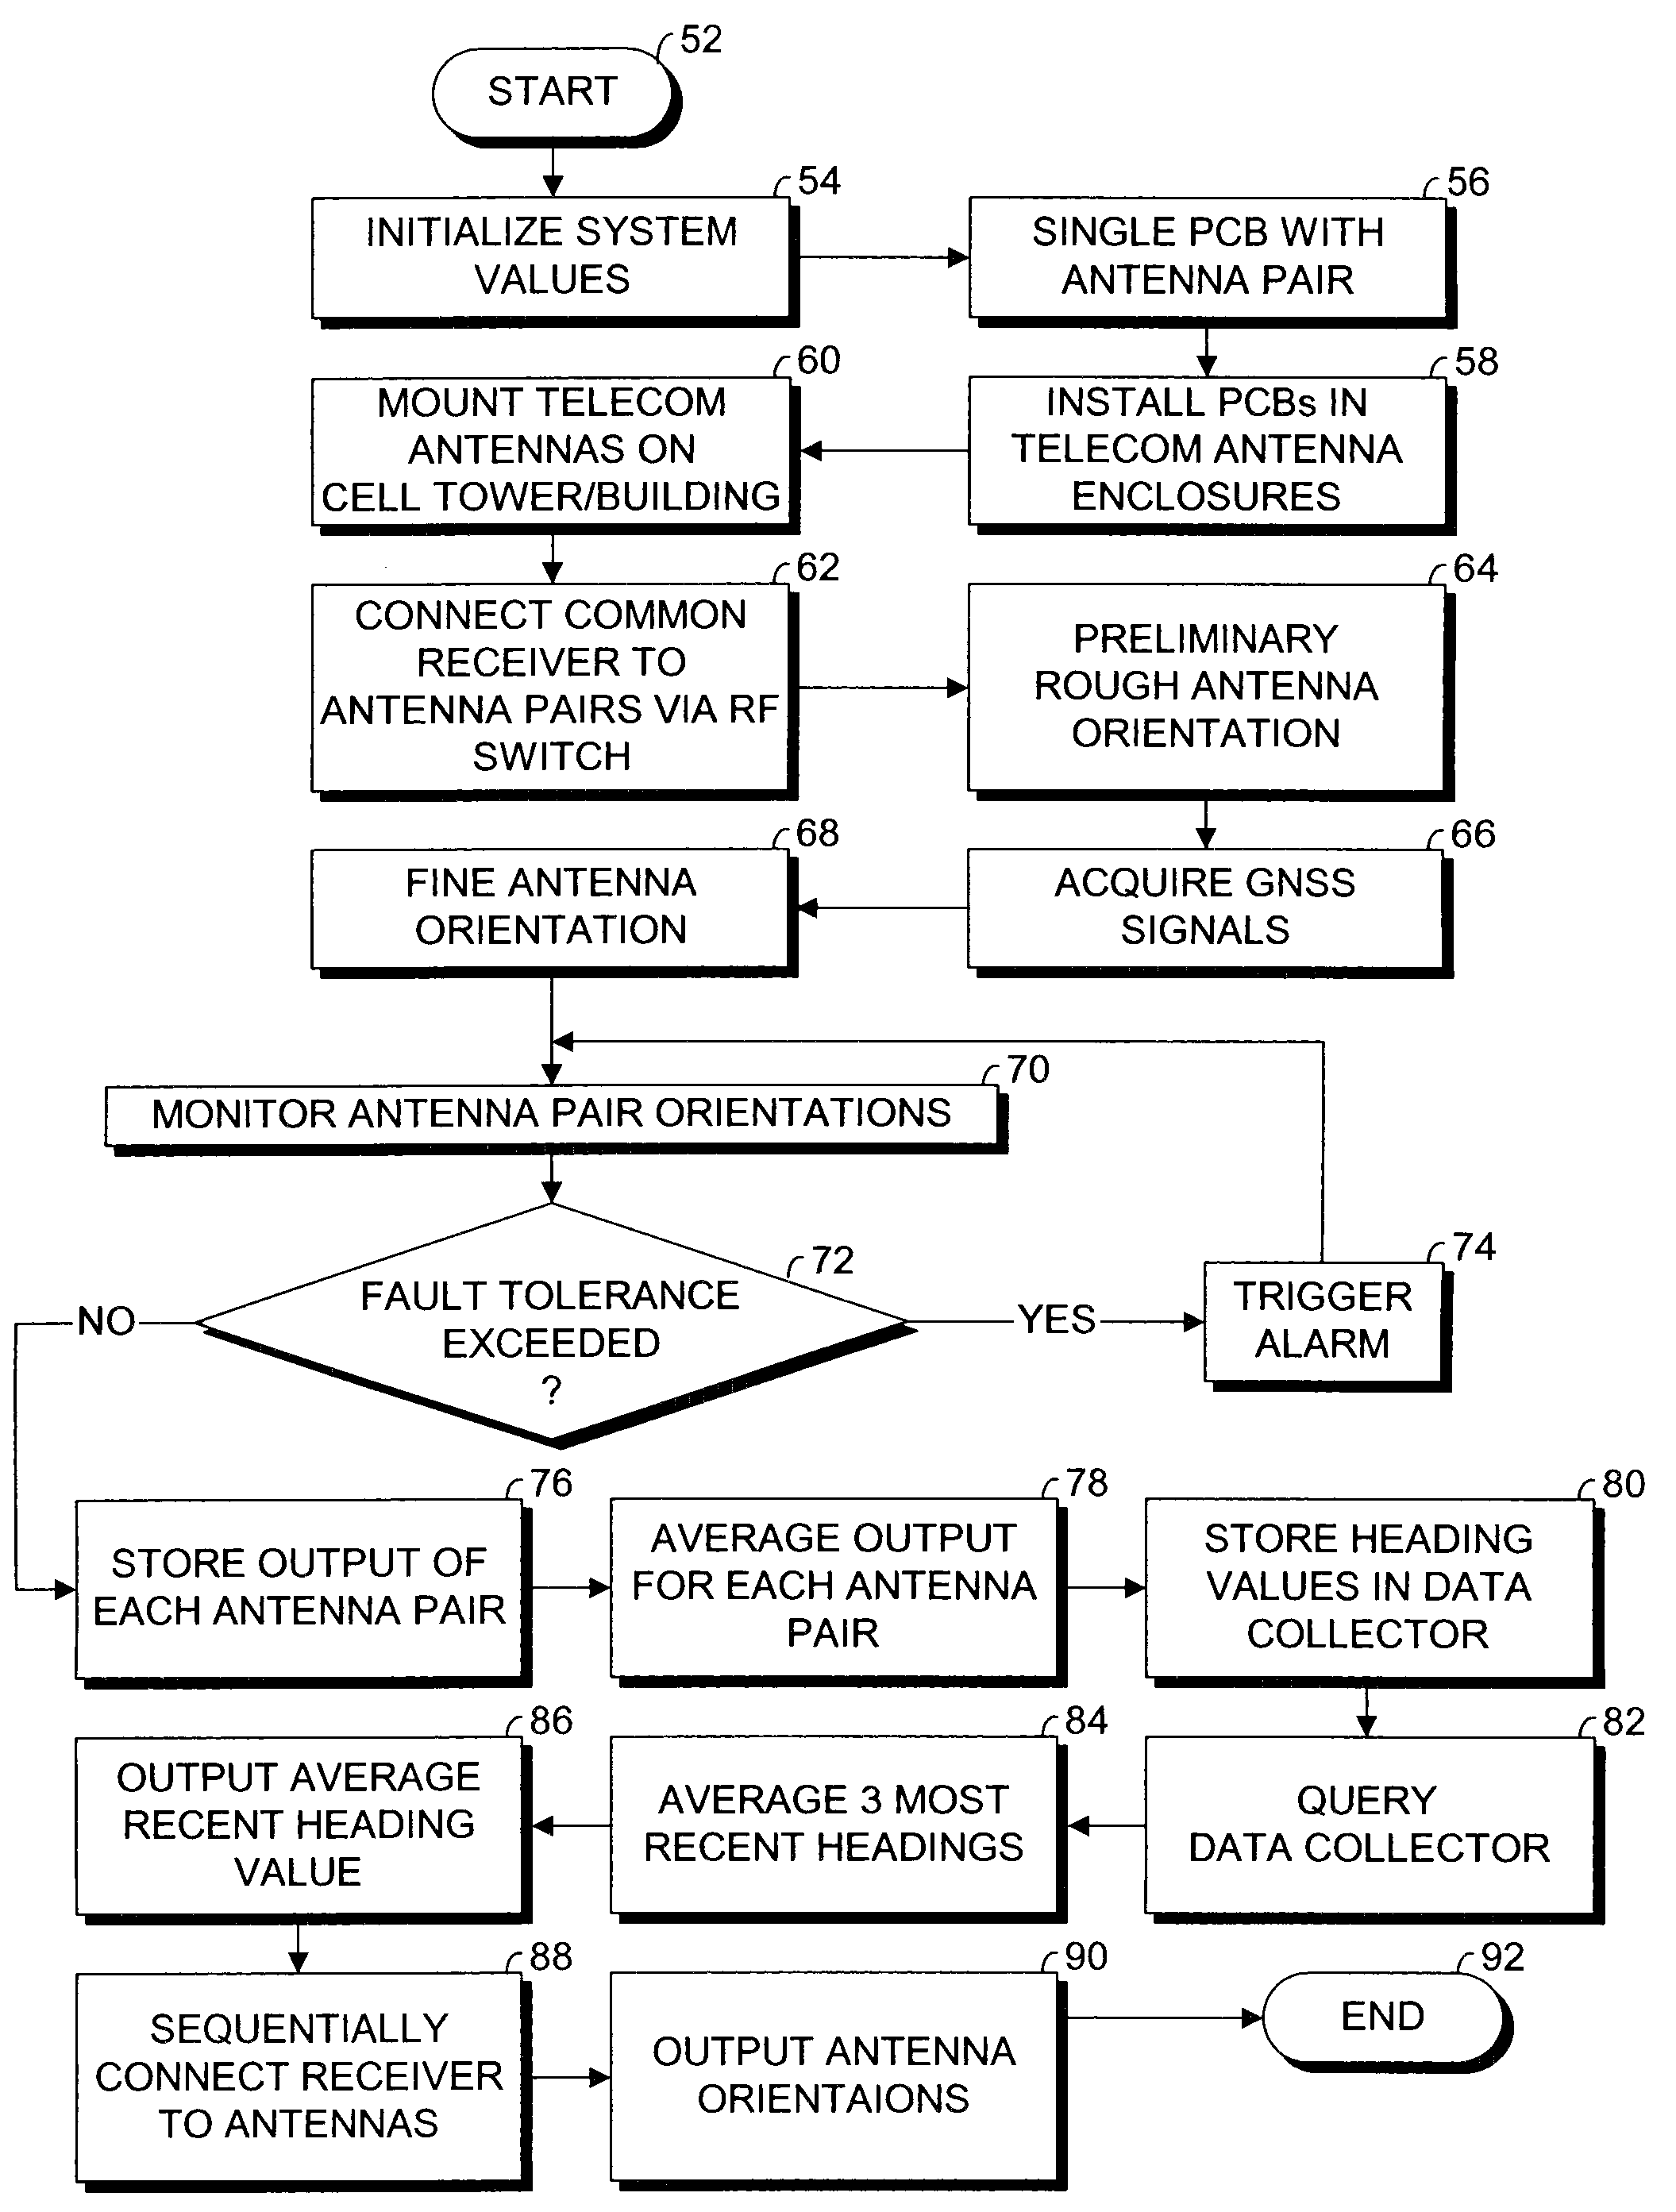 Antenna alignment and monitoring system and method using GNSS